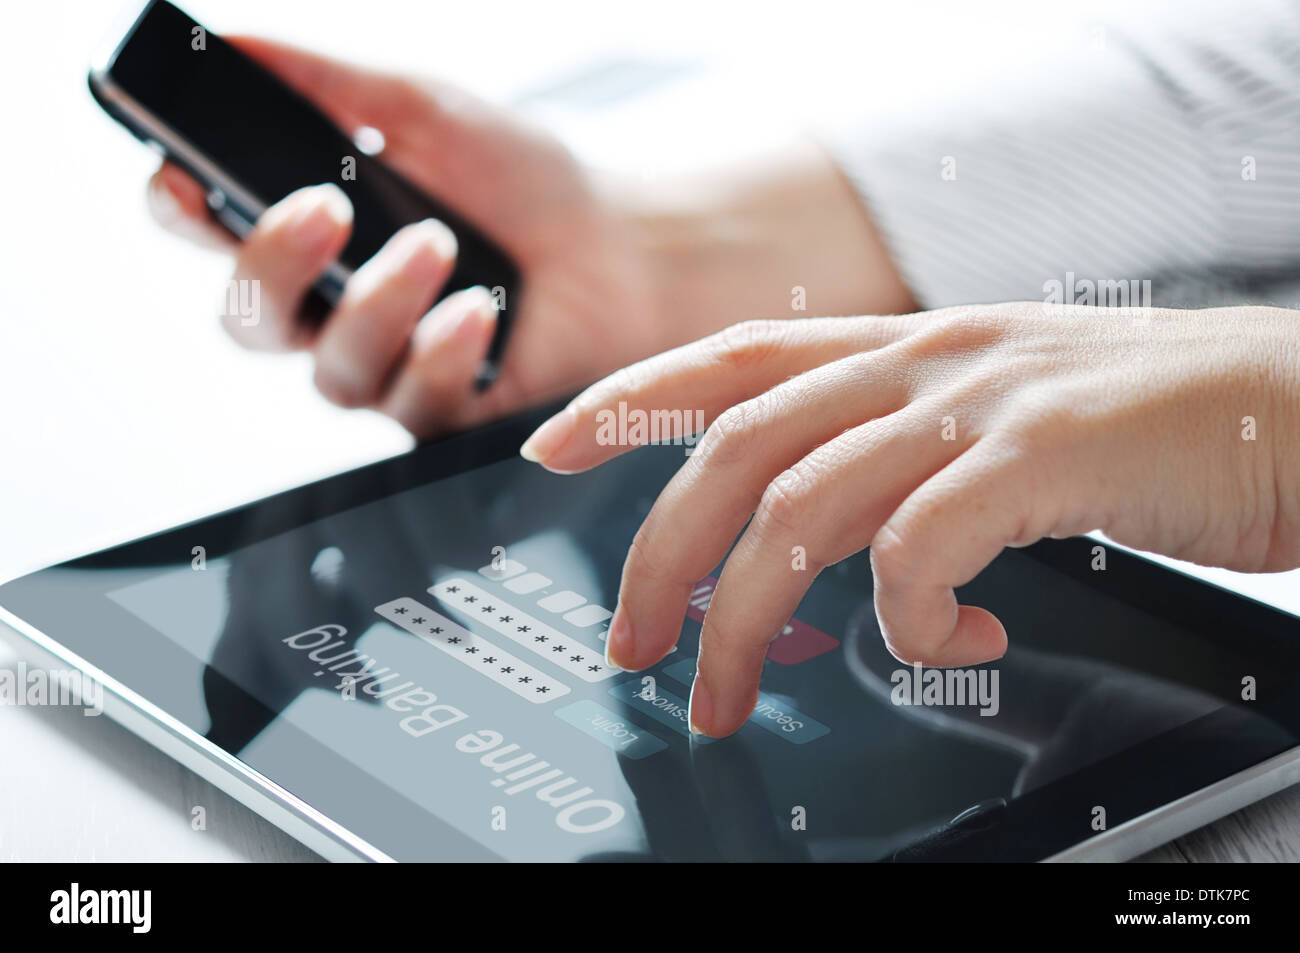 Female hands work with online banking on touch screen device Stock Photo